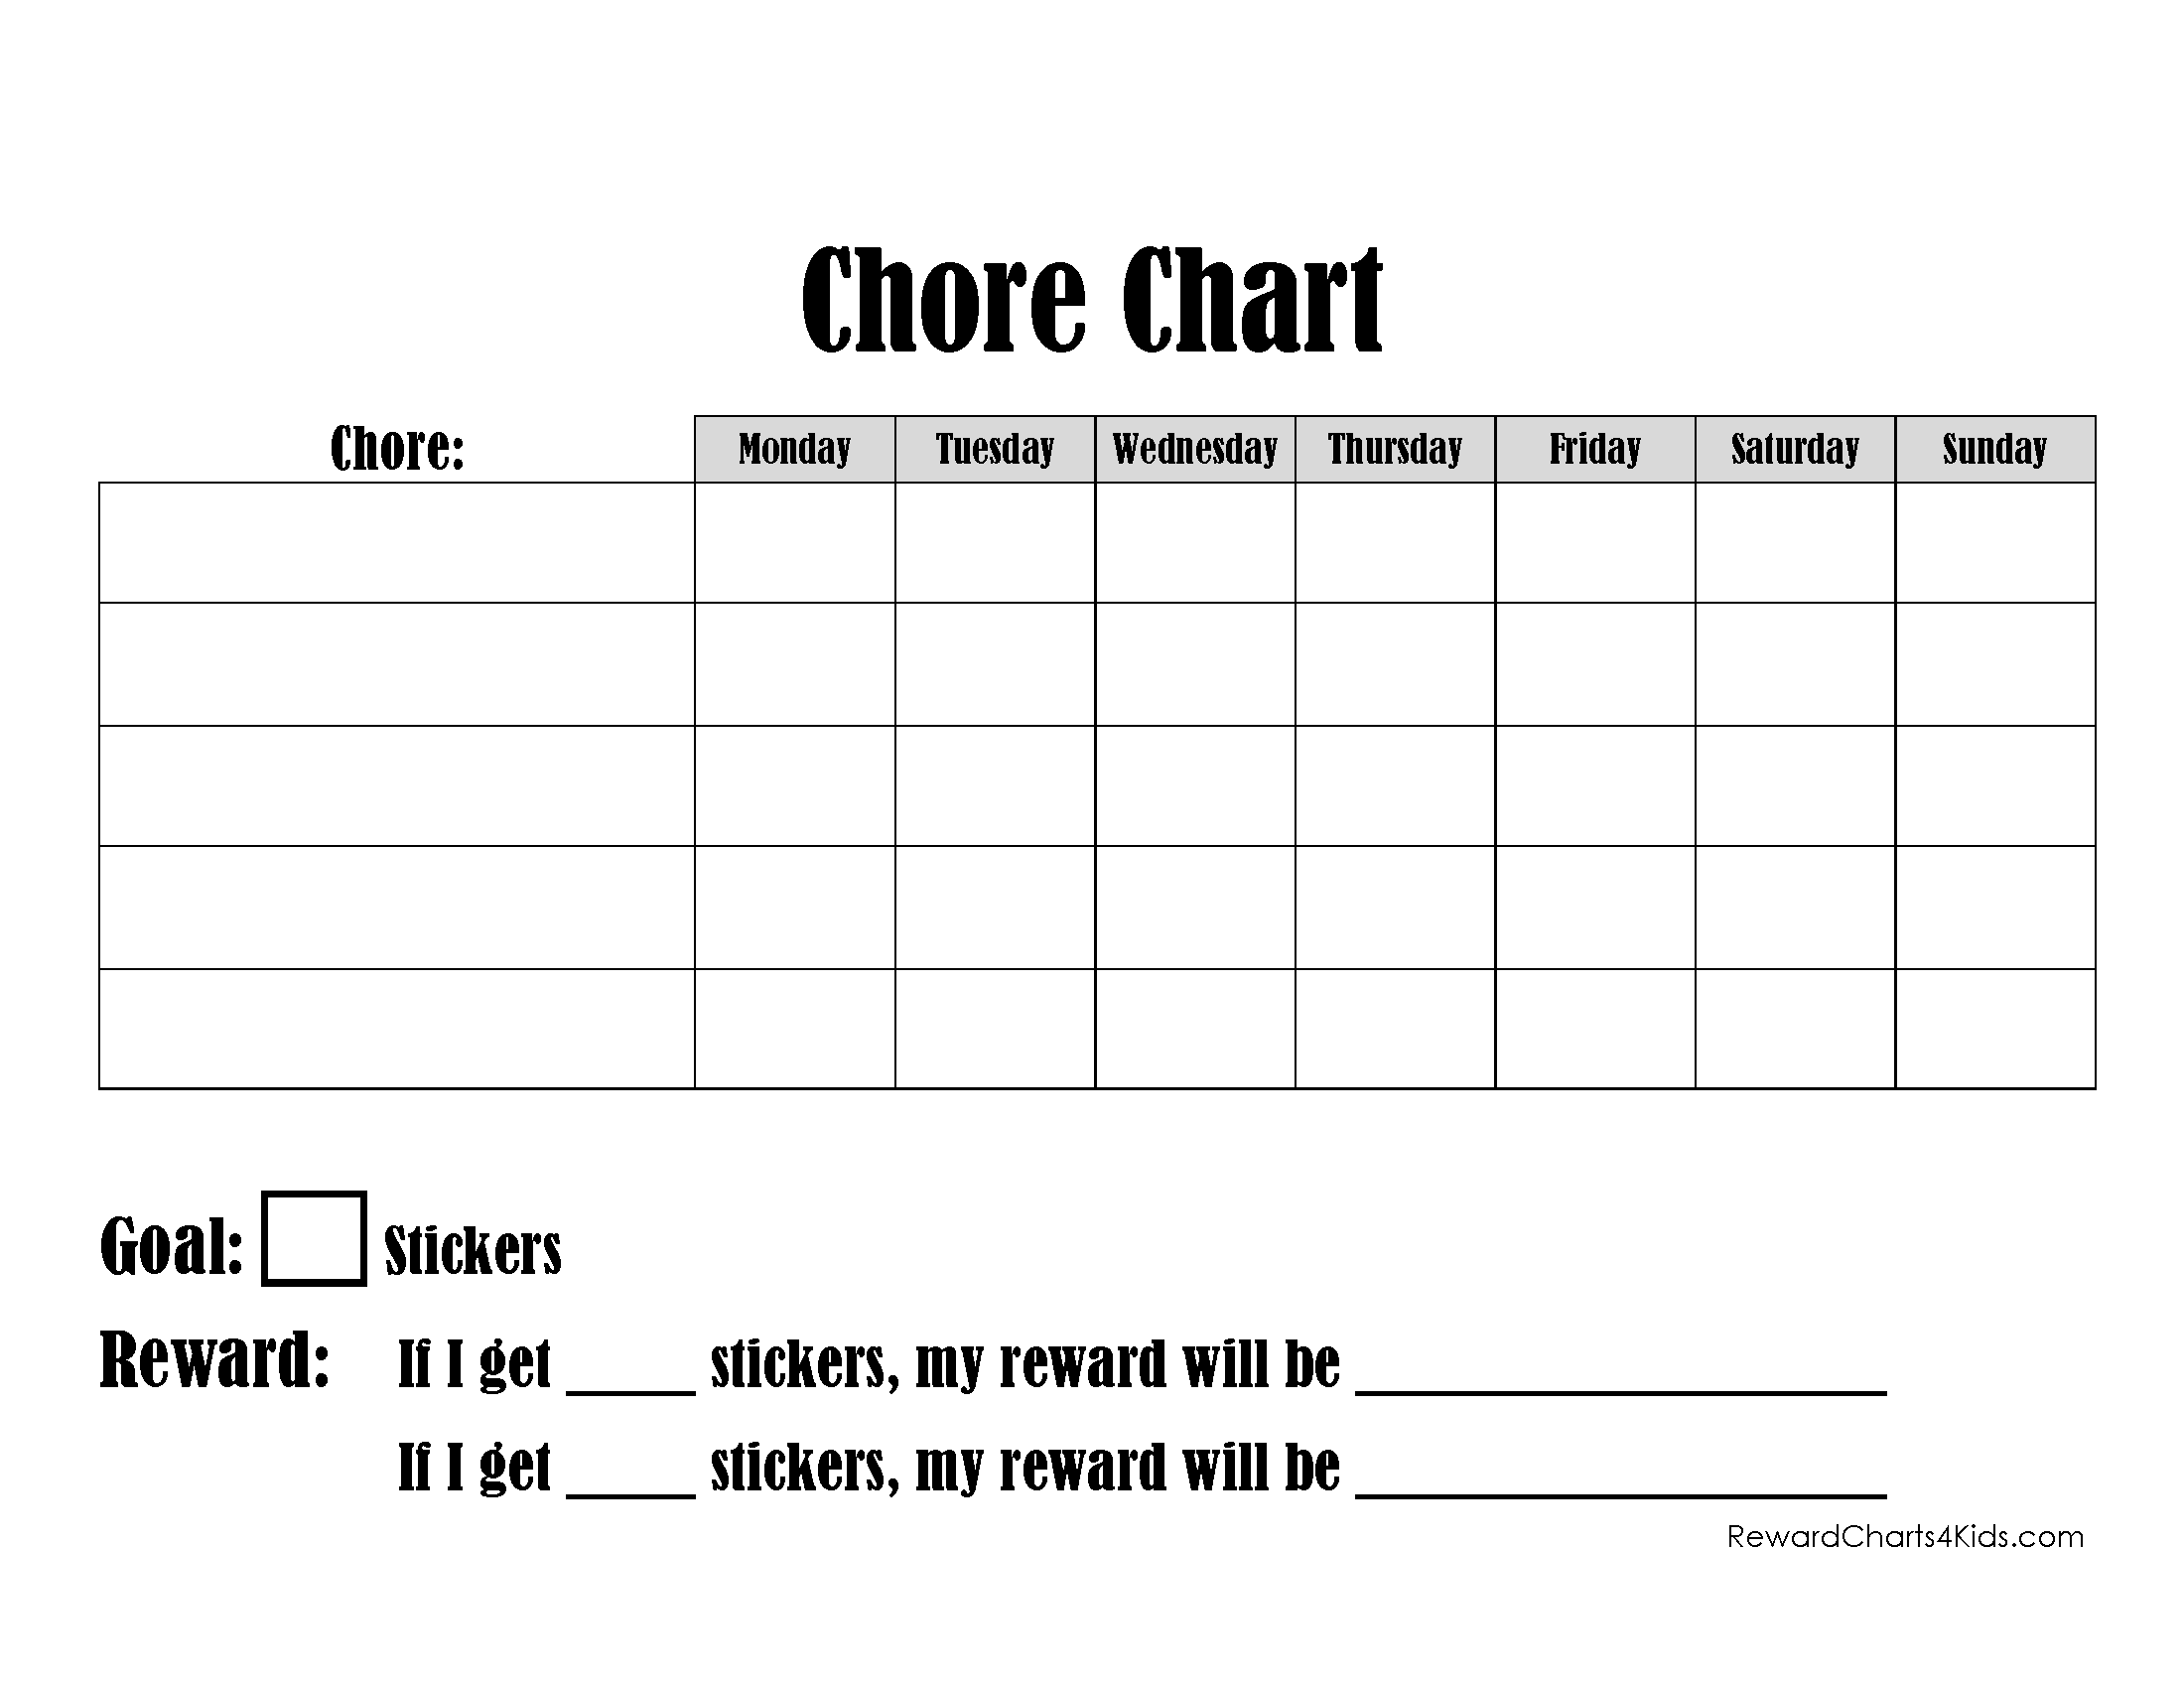 chores-for-9-year-olds-chore-list-free-chore-charts